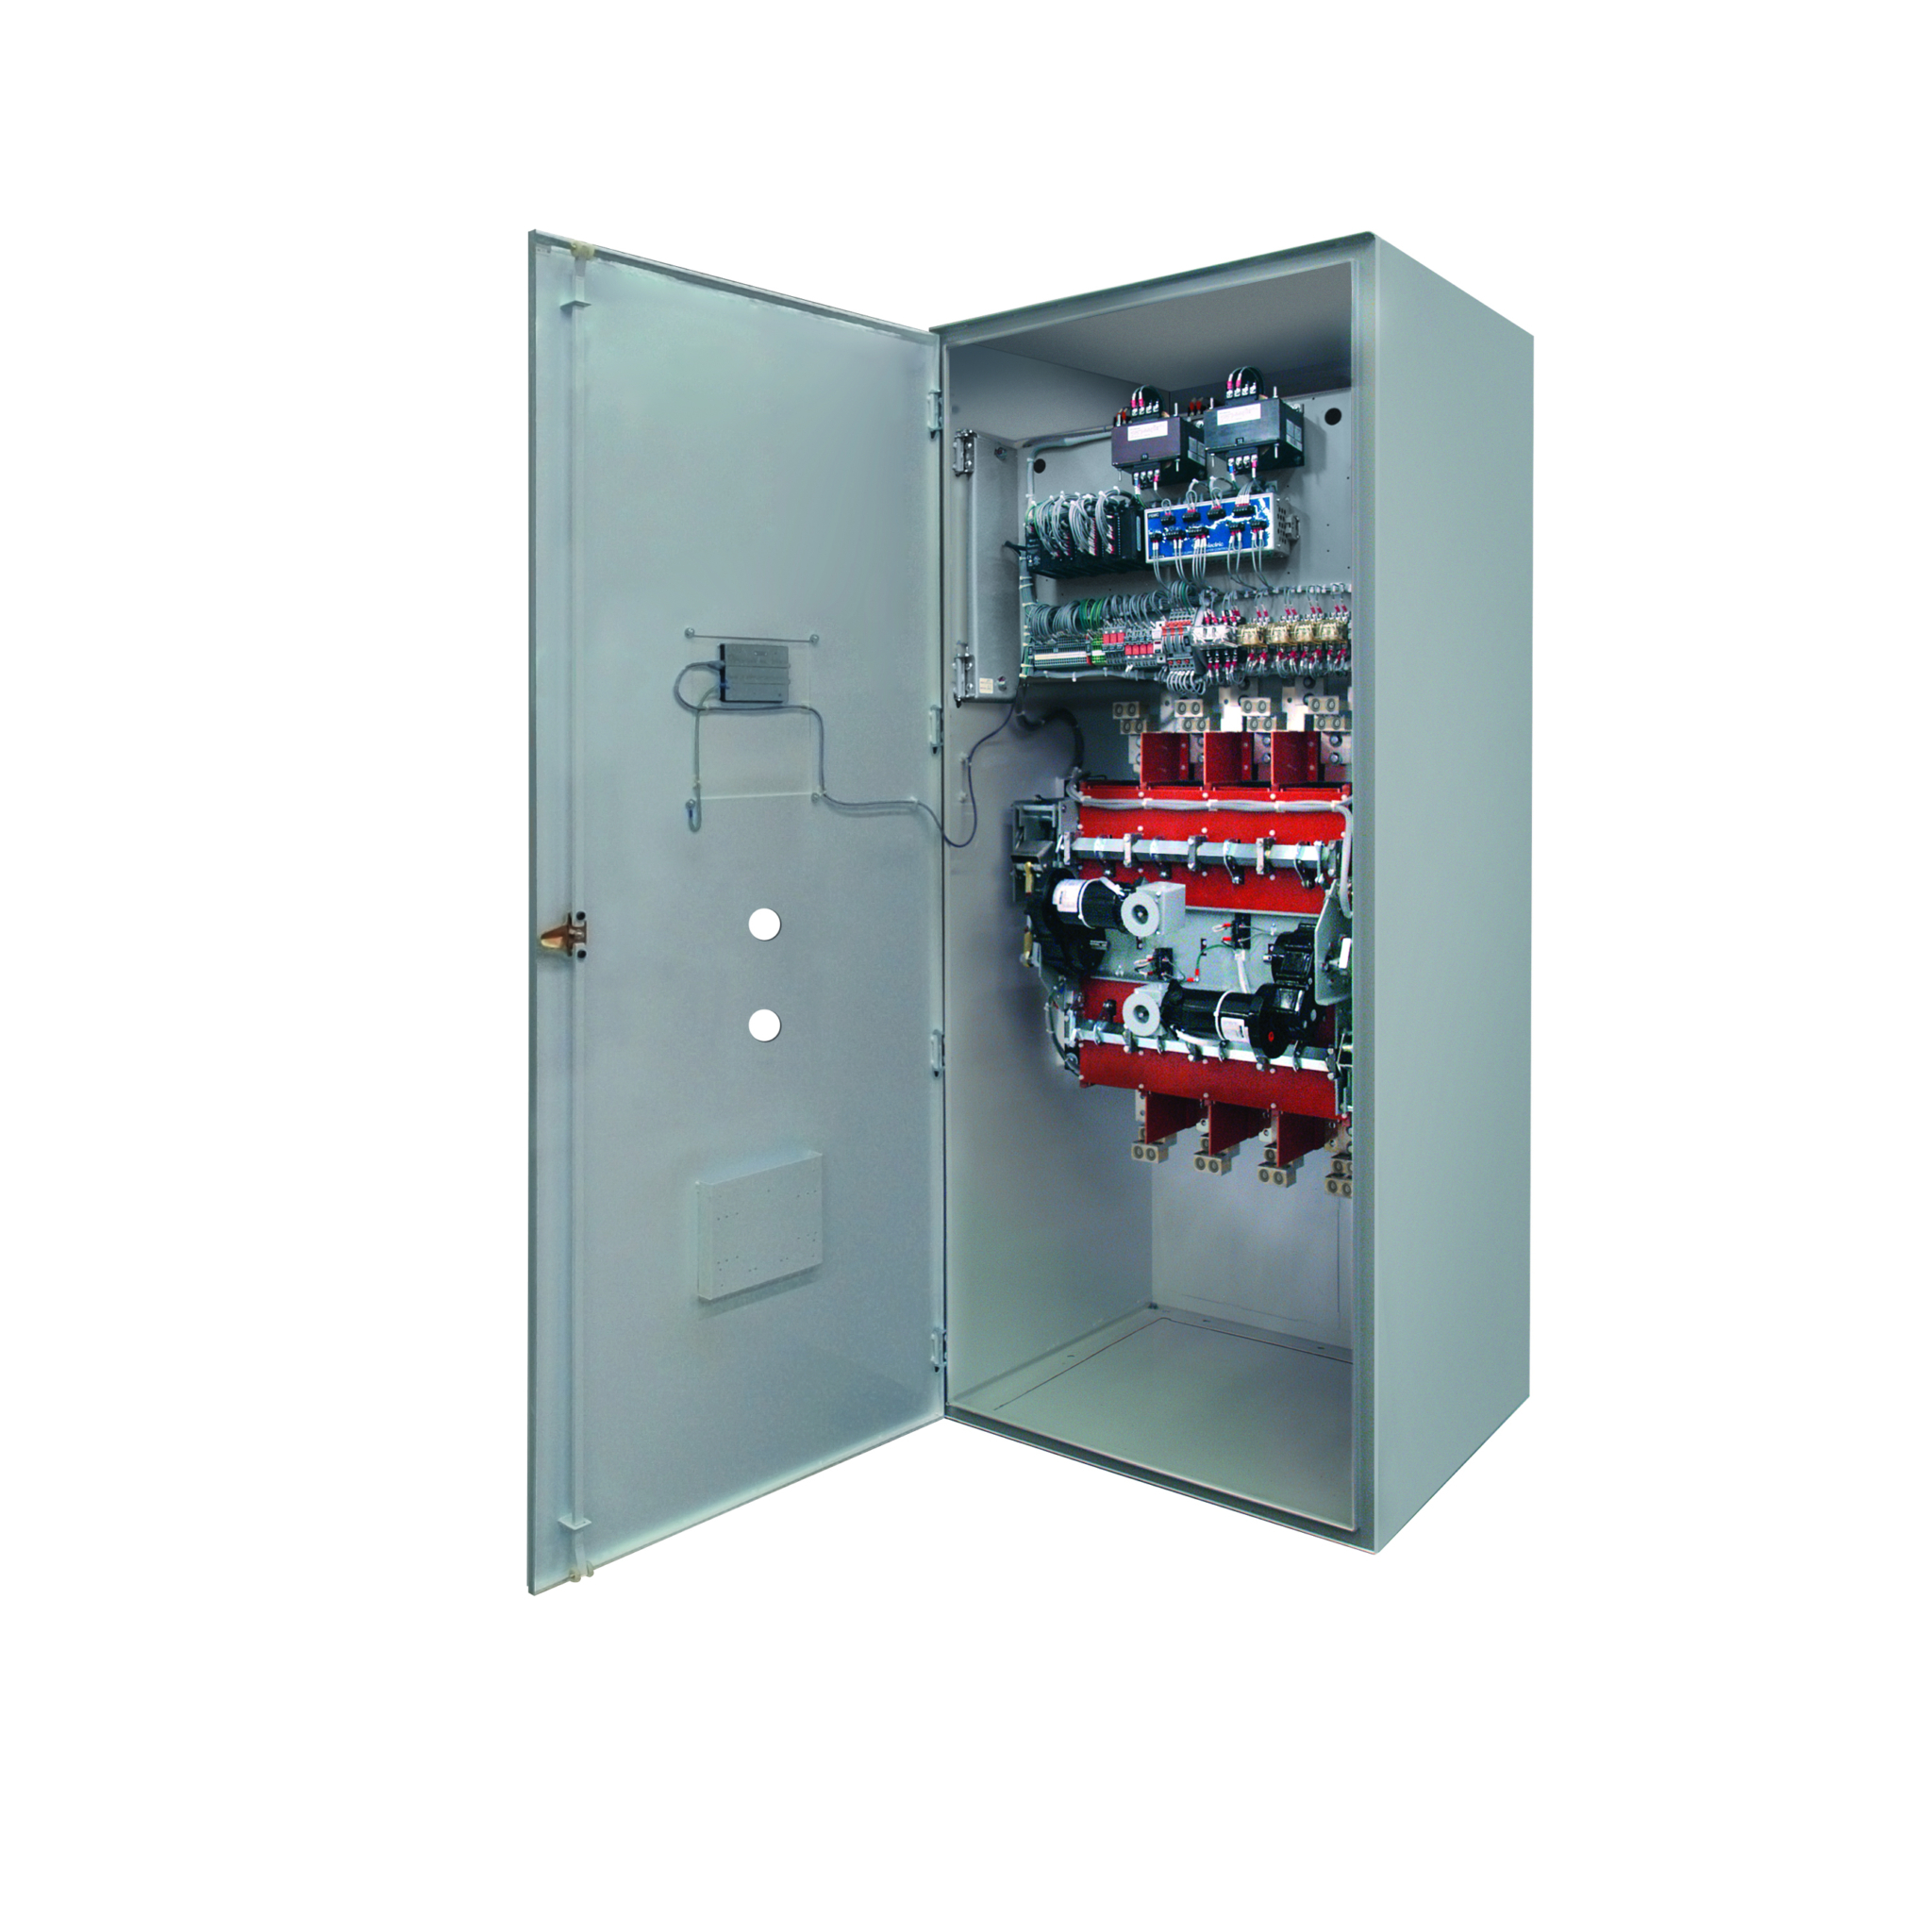 Russelectric power control systems are custom engineered for each specific installation.